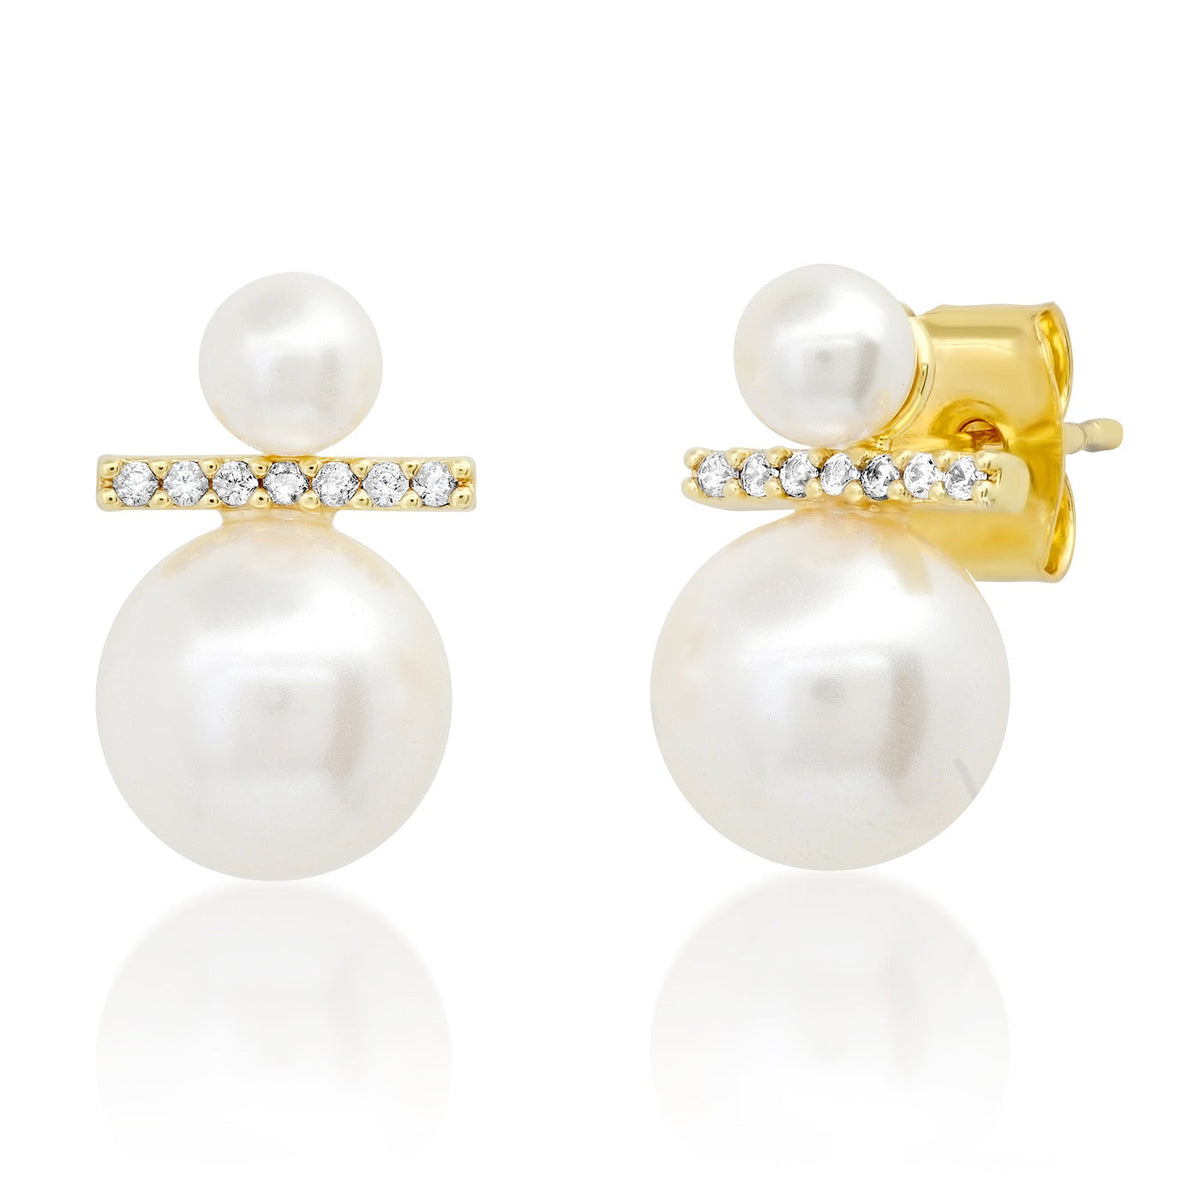 DOUBLE PEARL AND CZ MODERN STUD